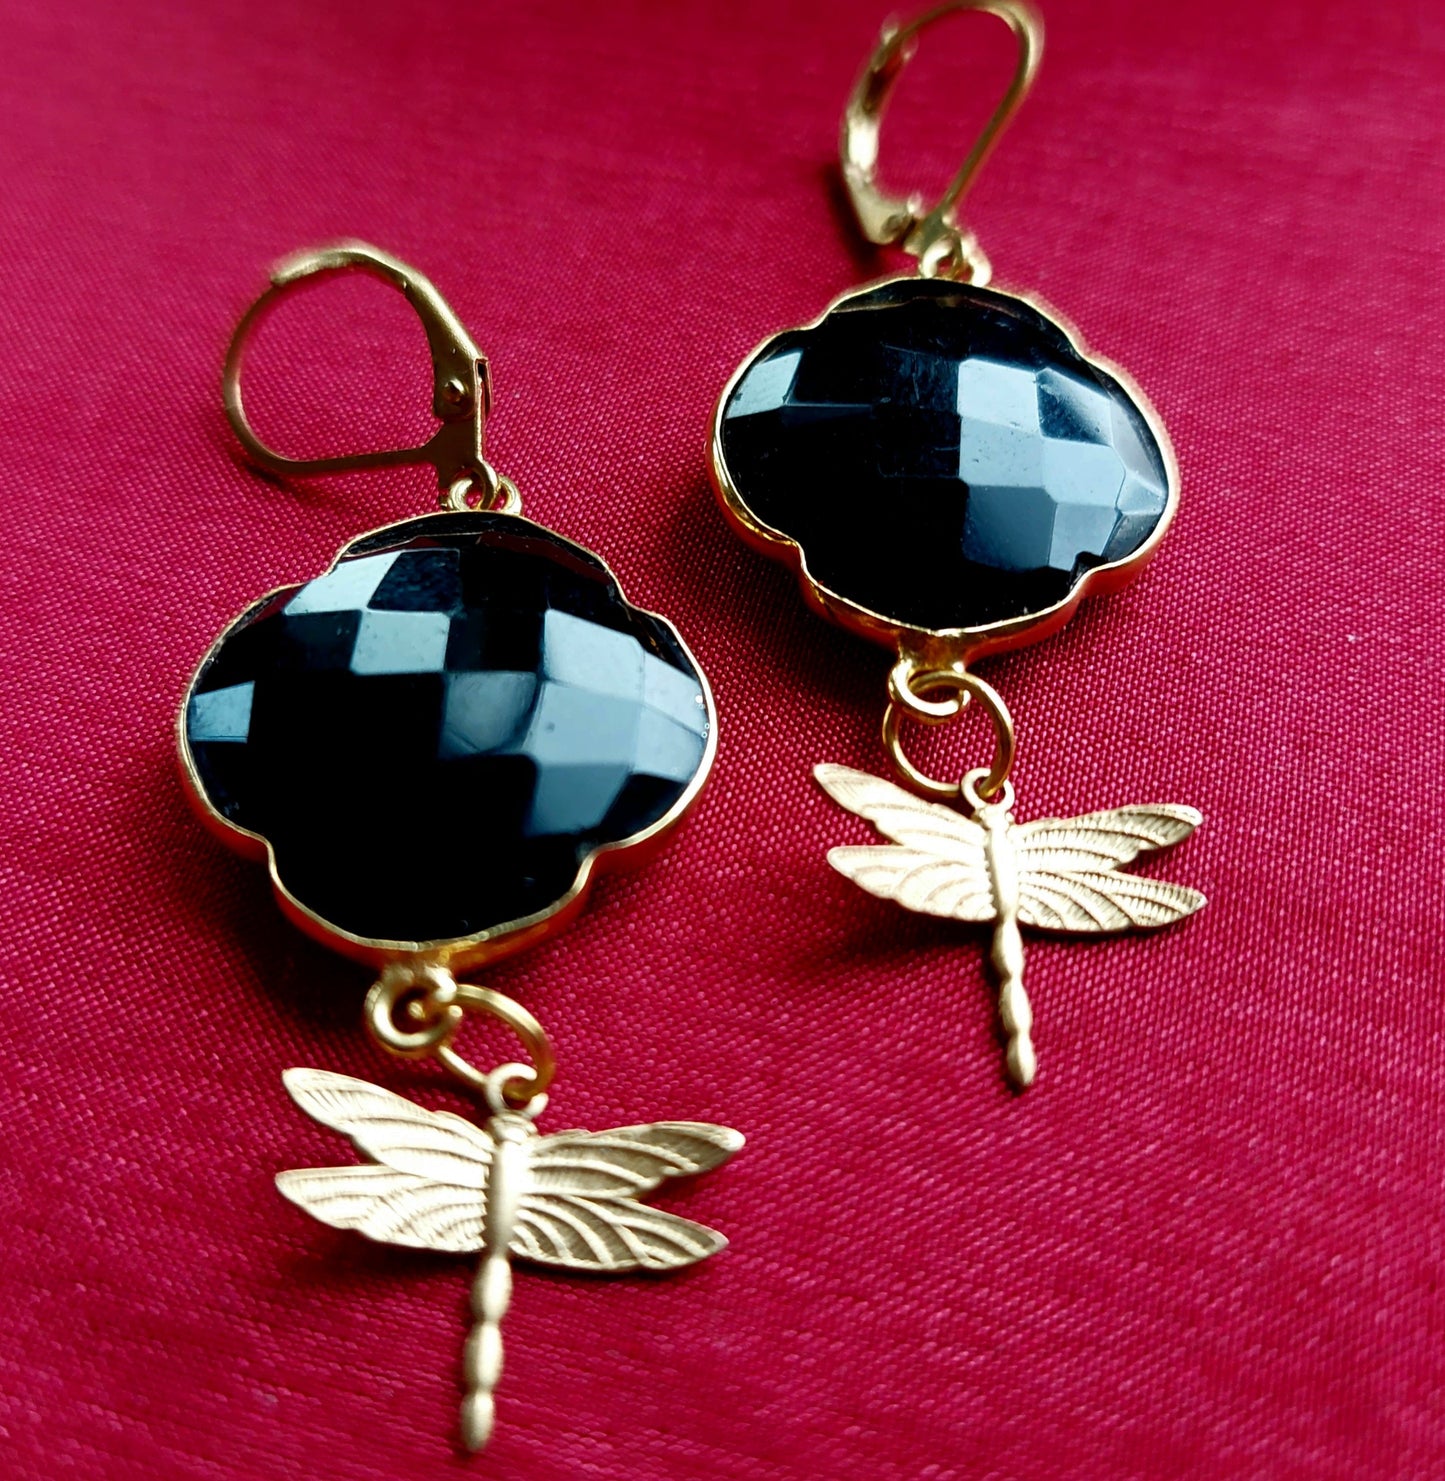 Onyx and dragonfly earrings.